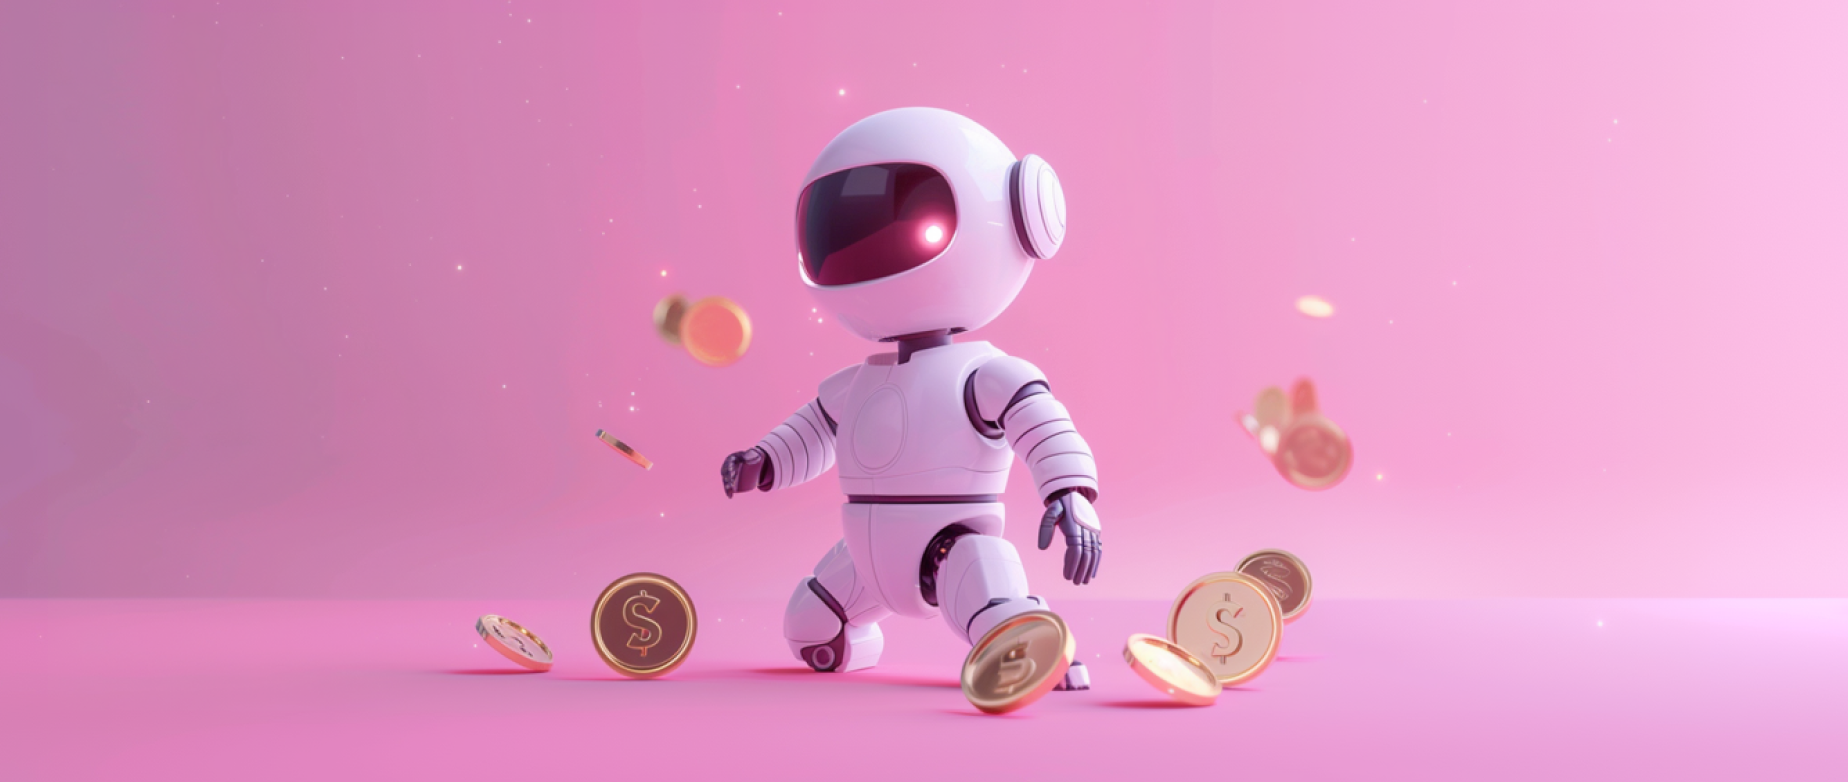 A robot walking among gold coins on a pink background.